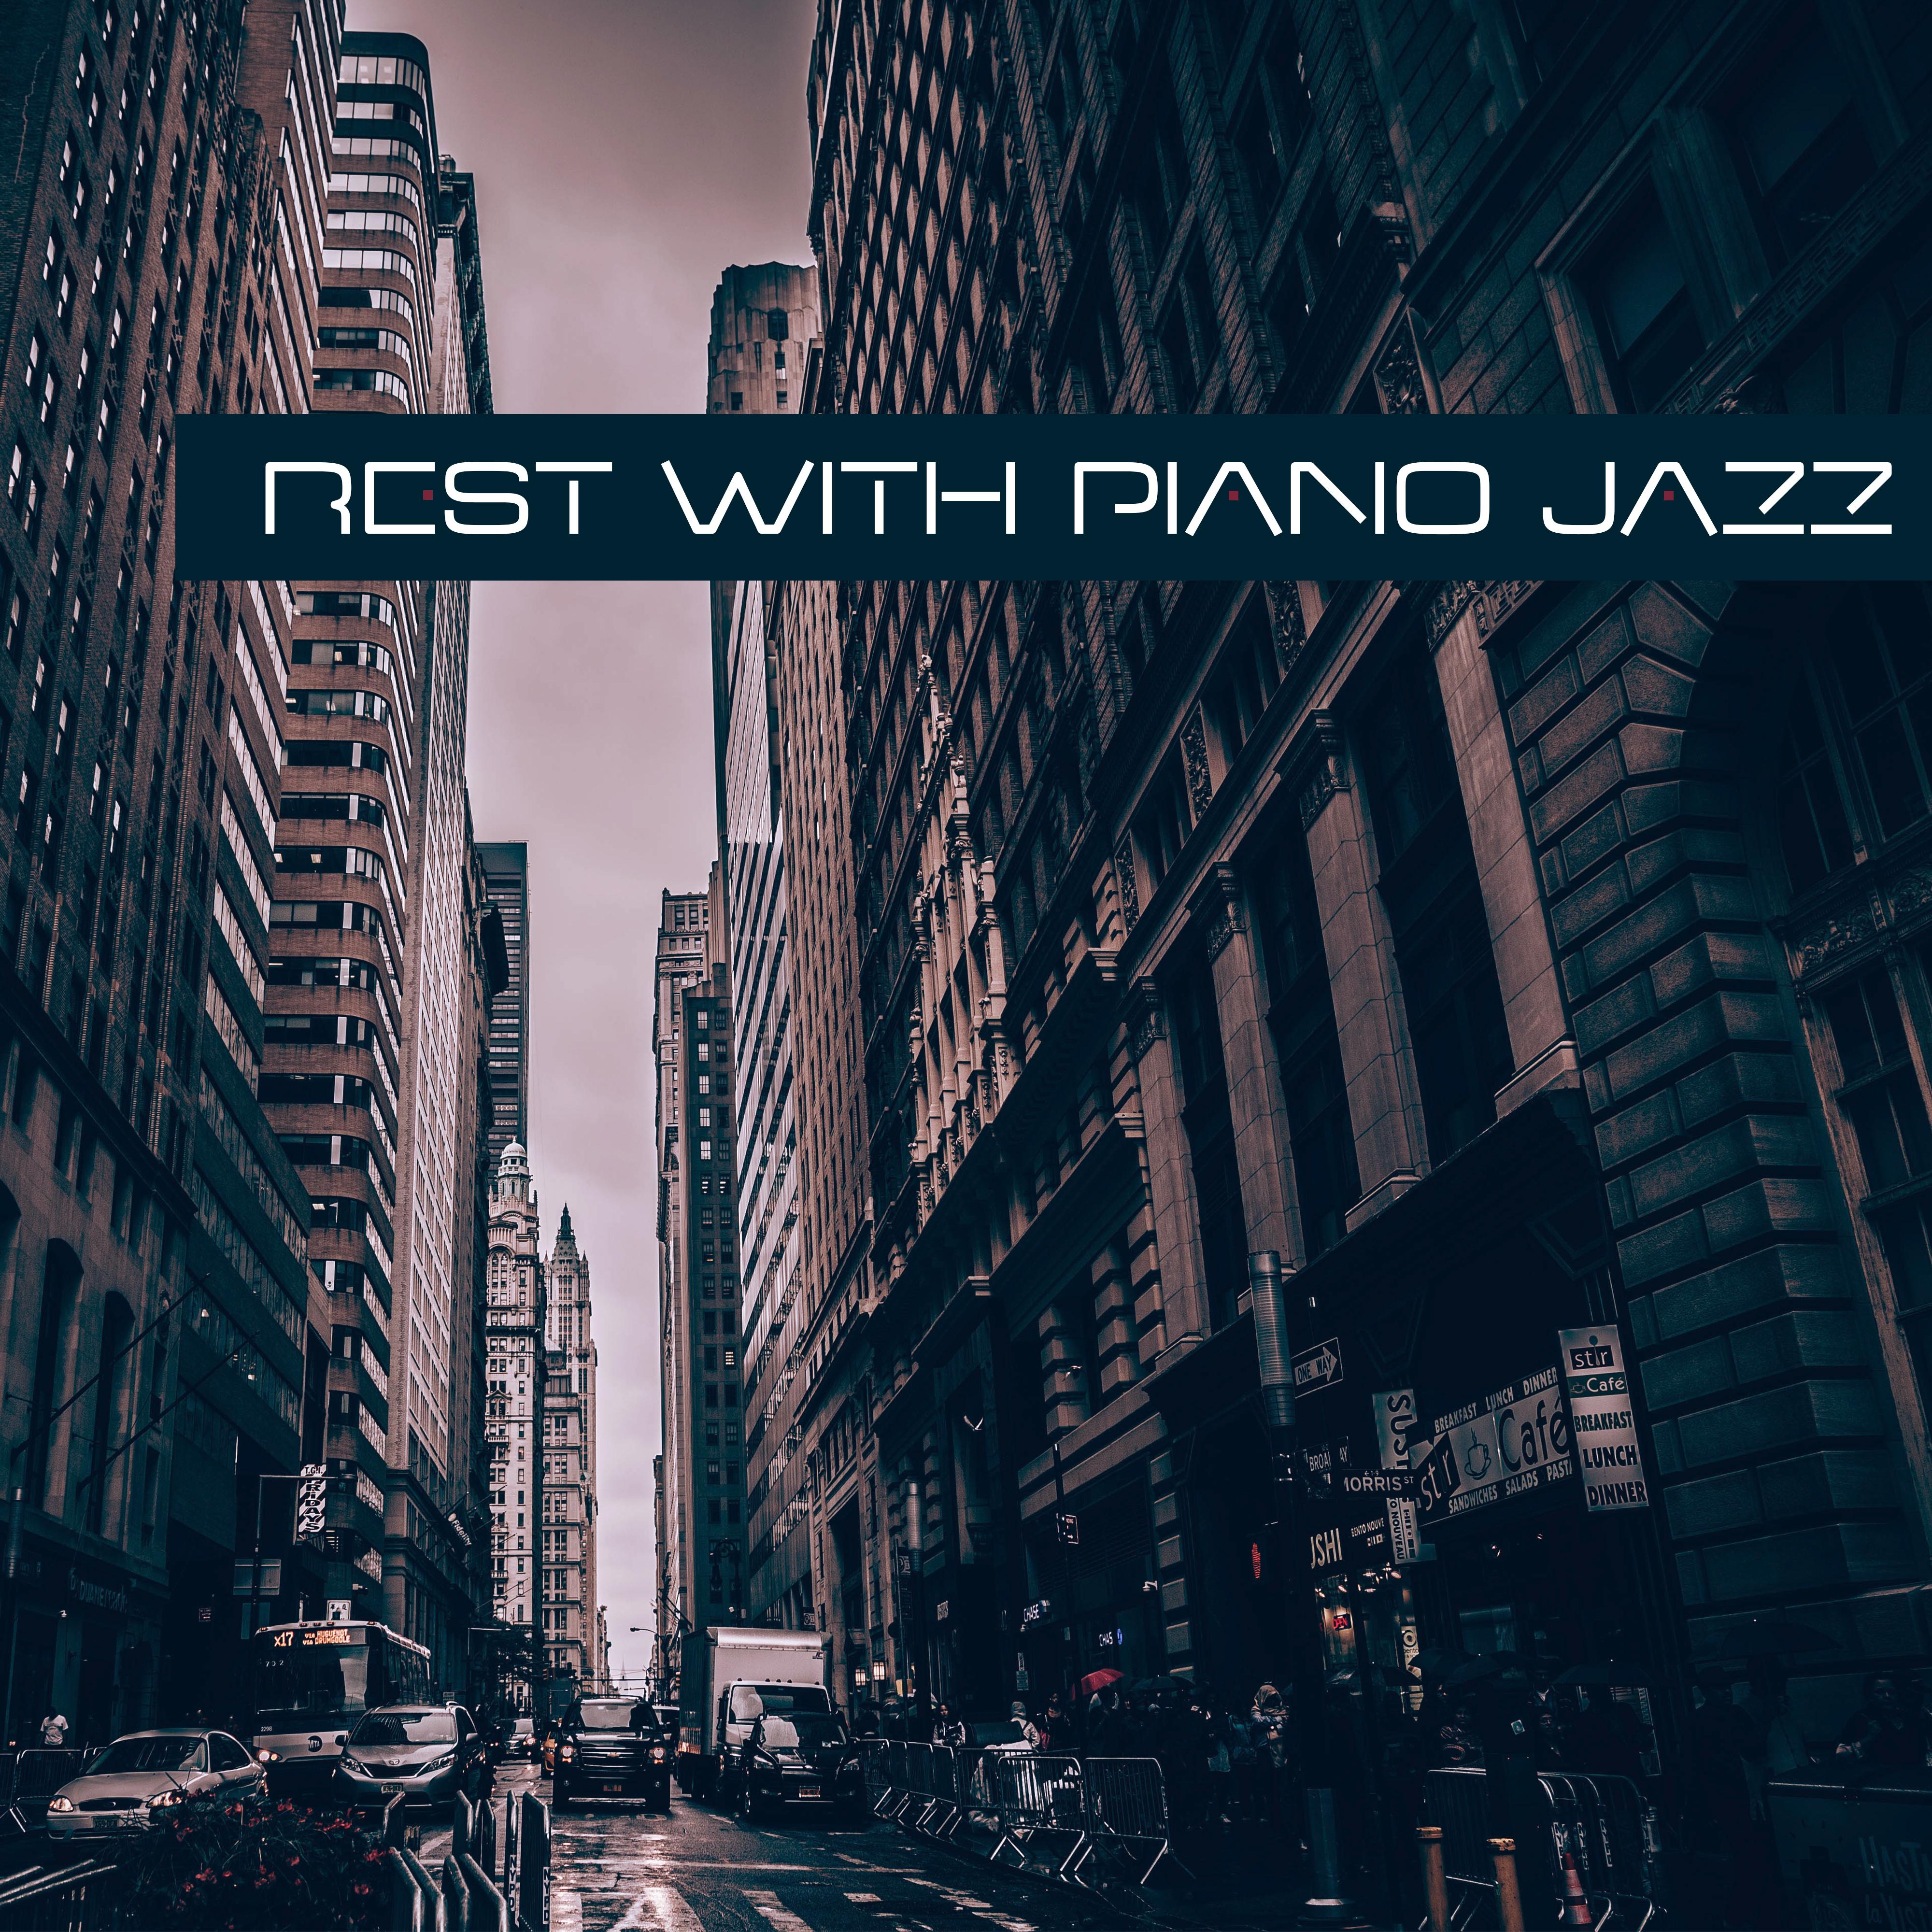 Rest with Piano Jazz  Soothing Jazz, Relax Yourself, Sounds to Calm Down, Easy Listening